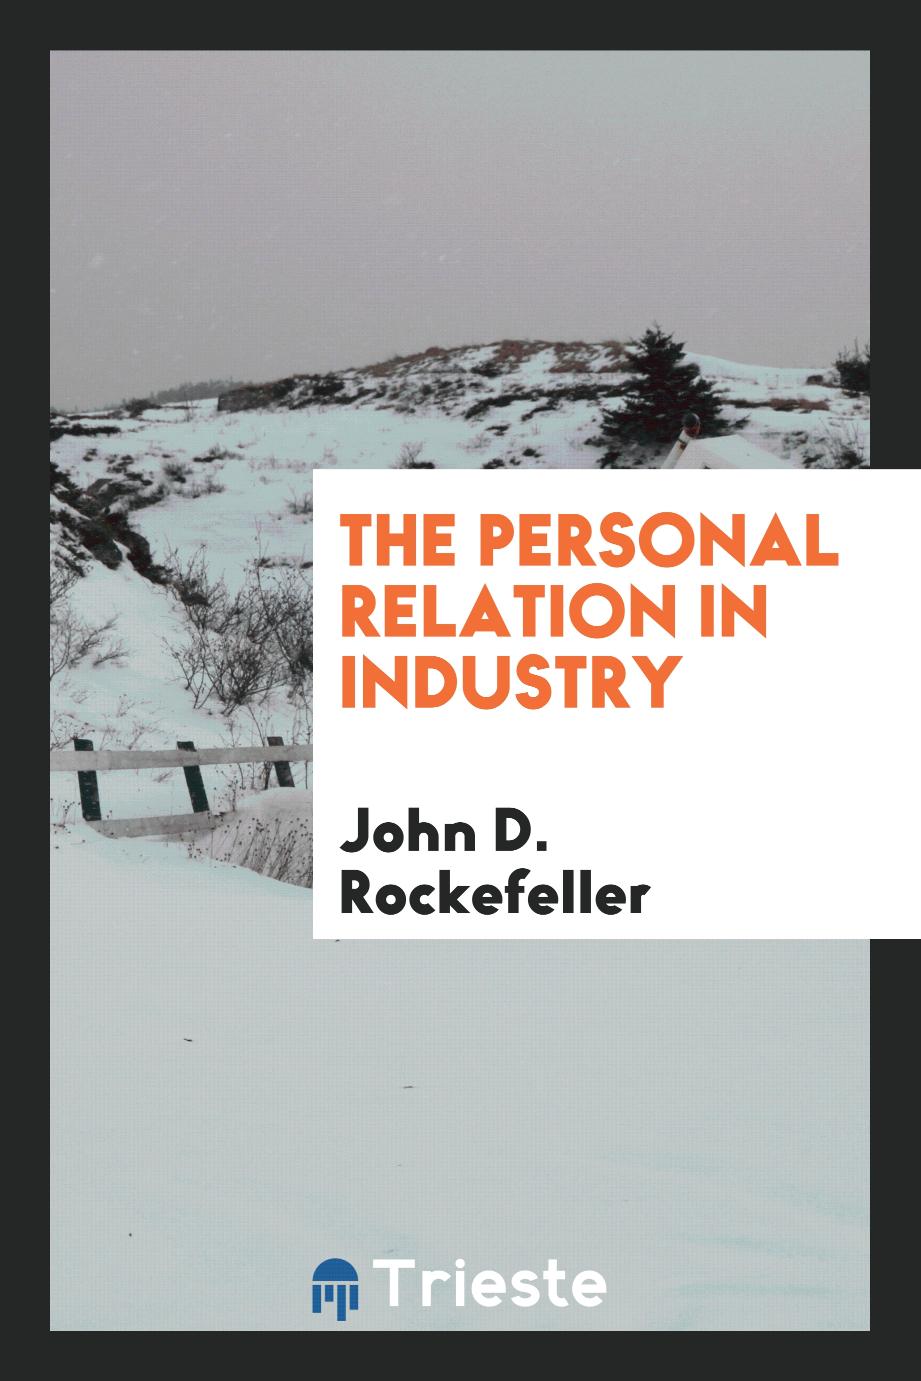 The personal relation in industry